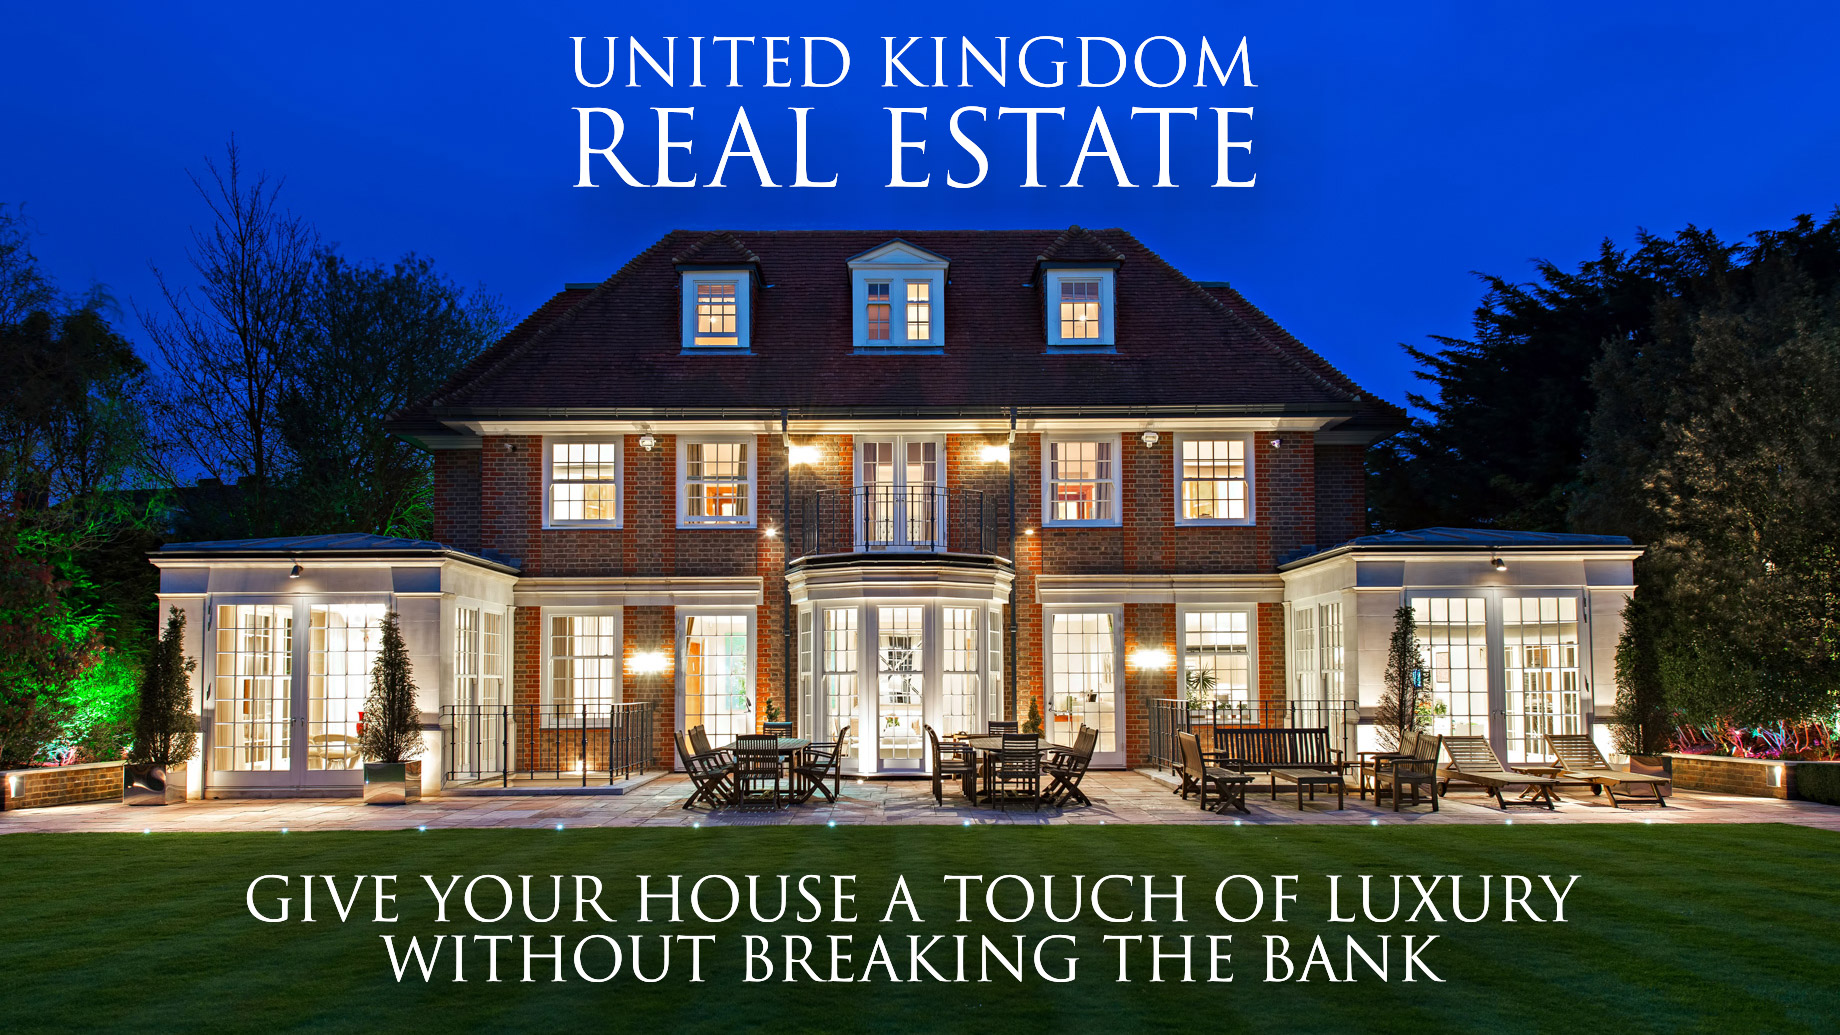 UK Real Estate – Give Your House a Touch of Luxury Without Breaking the Bank